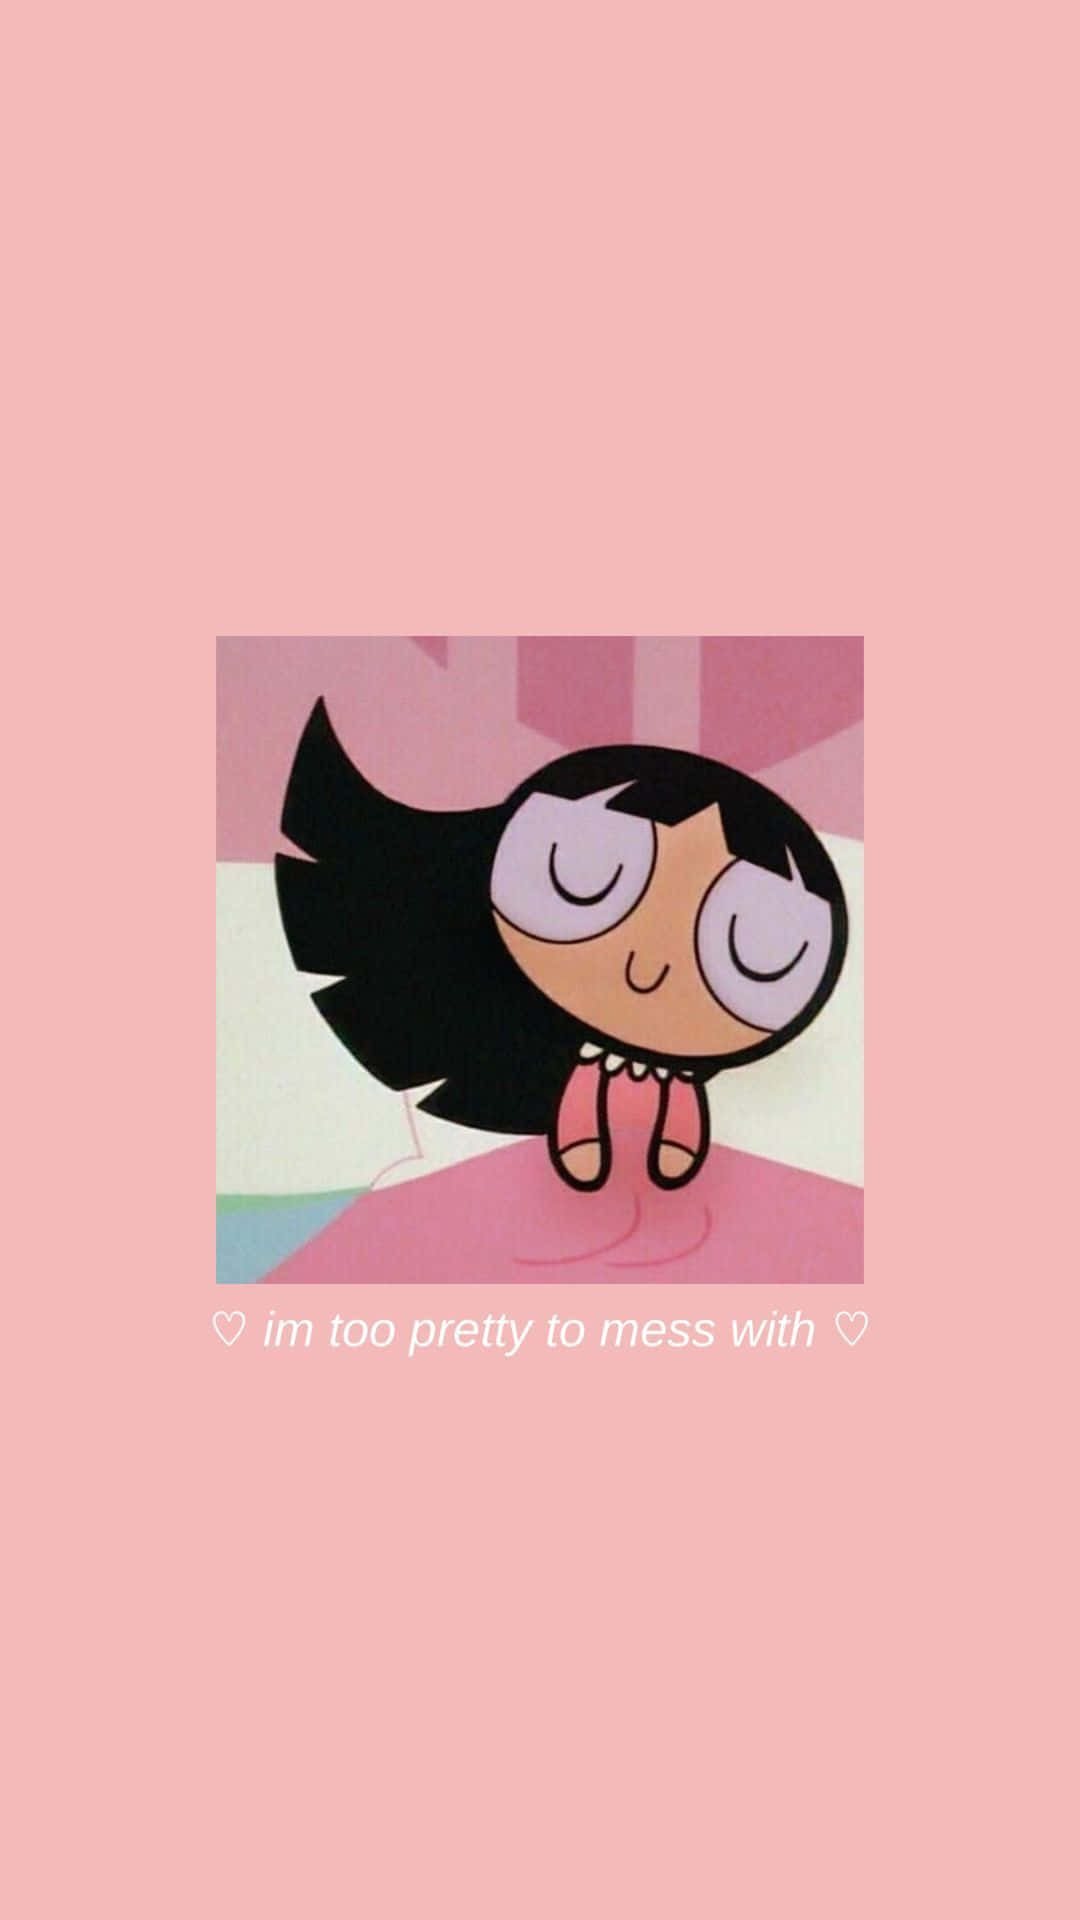 My too pretty to mess with - The Powerpuff Girls, Buttercup